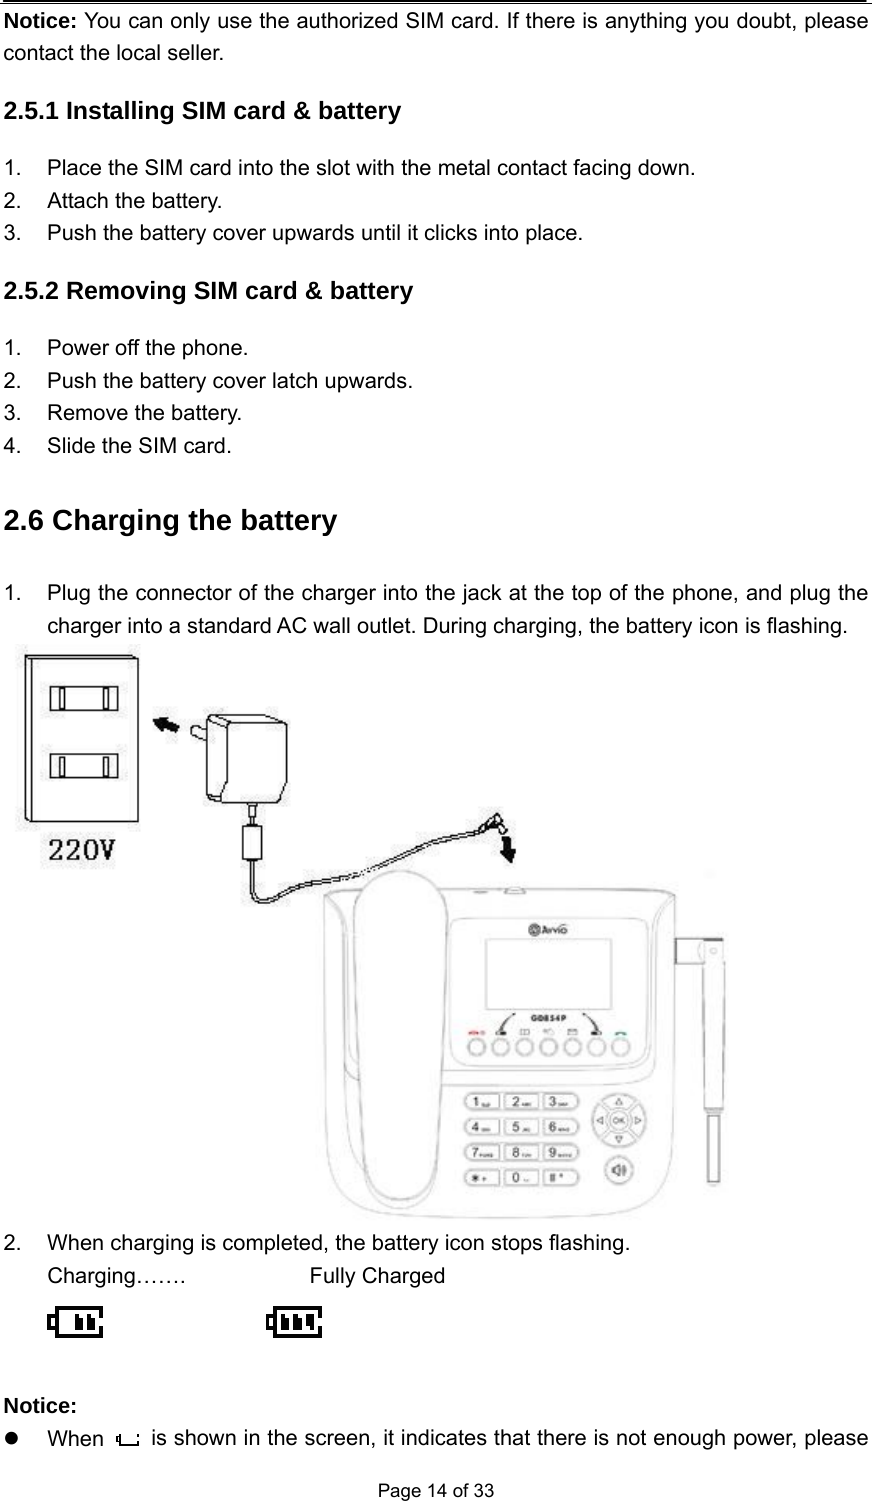  Page 14 of 33 Notice: You can only use the authorized SIM card. If there is anything you doubt, please contact the local seller. 2.5.1 Installing SIM card &amp; battery 1.  Place the SIM card into the slot with the metal contact facing down. 2.  Attach the battery. 3.  Push the battery cover upwards until it clicks into place. 2.5.2 Removing SIM card &amp; battery 1.  Power off the phone. 2.  Push the battery cover latch upwards. 3.  Remove the battery. 4.  Slide the SIM card. 2.6 Charging the battery 1.  Plug the connector of the charger into the jack at the top of the phone, and plug the charger into a standard AC wall outlet. During charging, the battery icon is flashing.  2.  When charging is completed, the battery icon stops flashing. Charging…….   Fully Charged        Notice: z When    is shown in the screen, it indicates that there is not enough power, please 